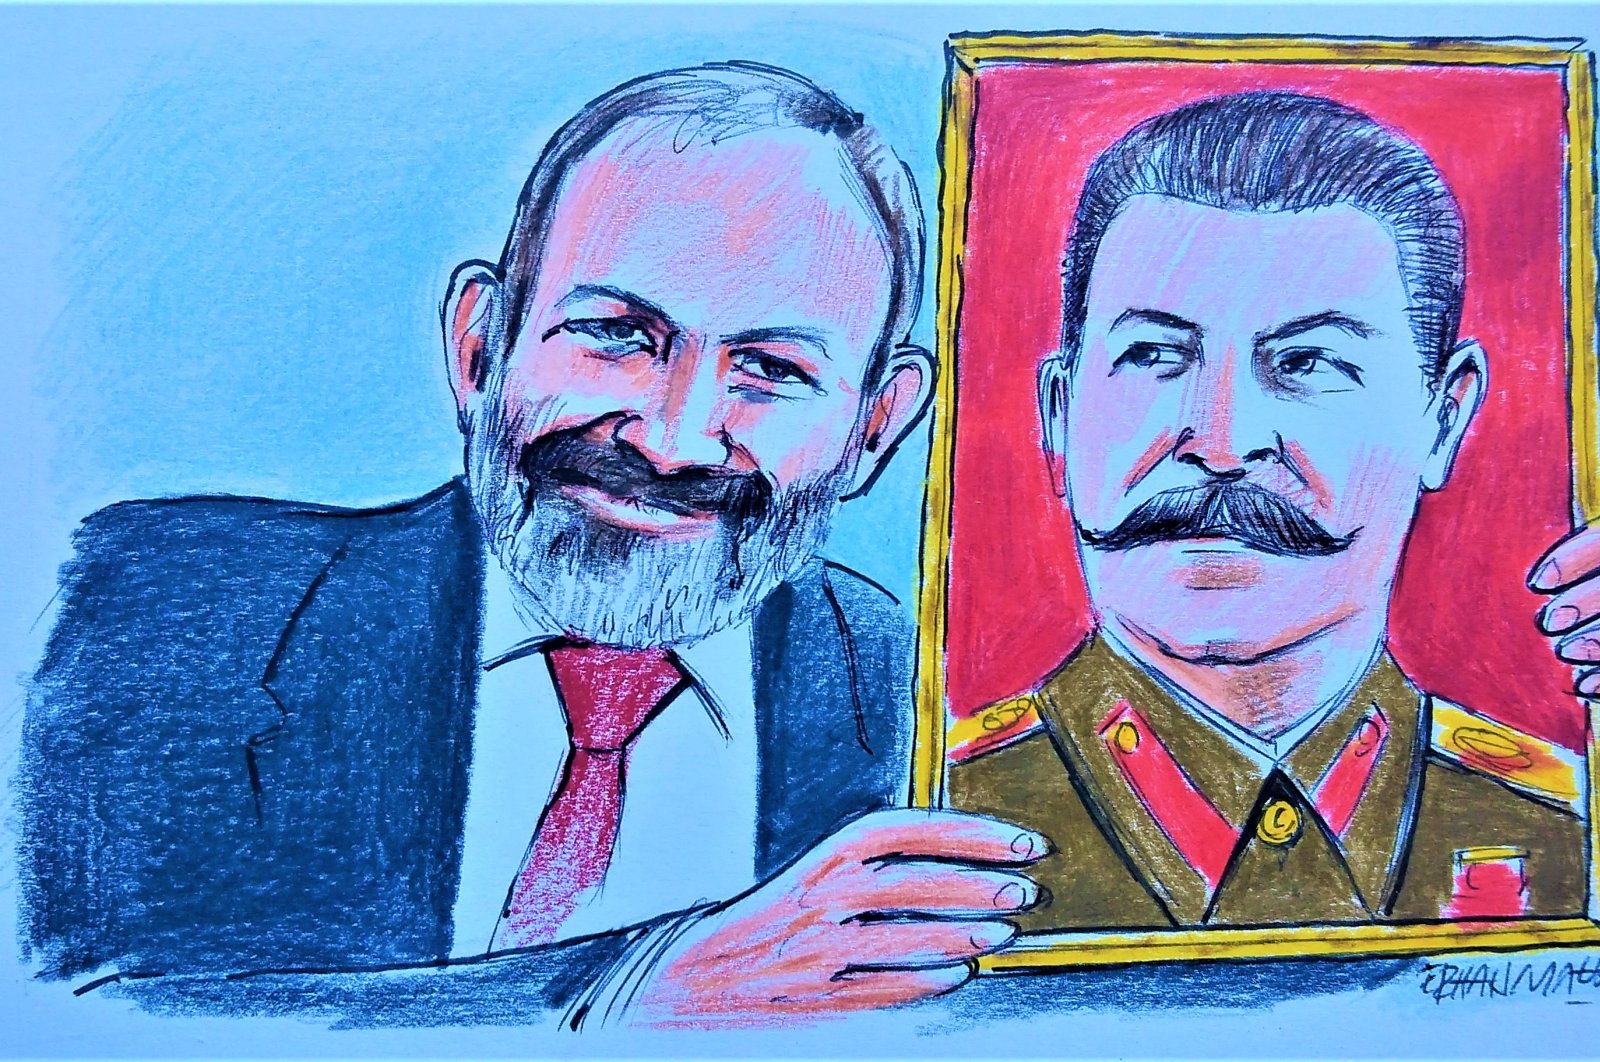 "In the 20th century, hundreds of thousands of Azerbaijanis living in Armenia were expelled from their lands four times. Three of these expulsions took place after the war between the two nations, and one was Soviet leader Joseph Stalin&#039;s decision." (Illustration by Erhan Yalvaç)